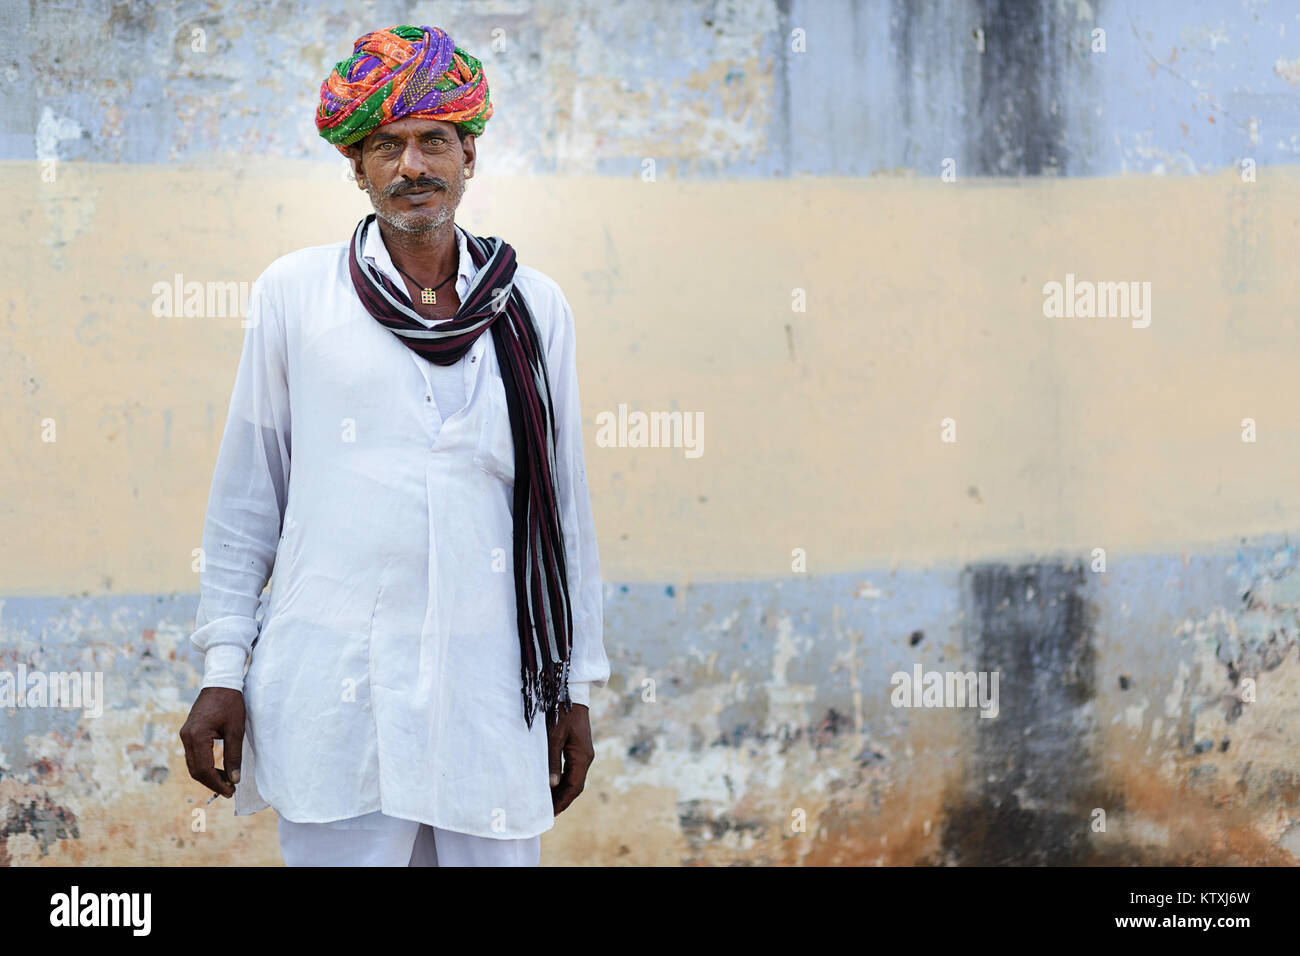 Portrait of old indian man with mustache, green eyes in white outfit with a colorful turban and a scarf, in a village near Pushkar, Rajasthan, India. Stock Photo